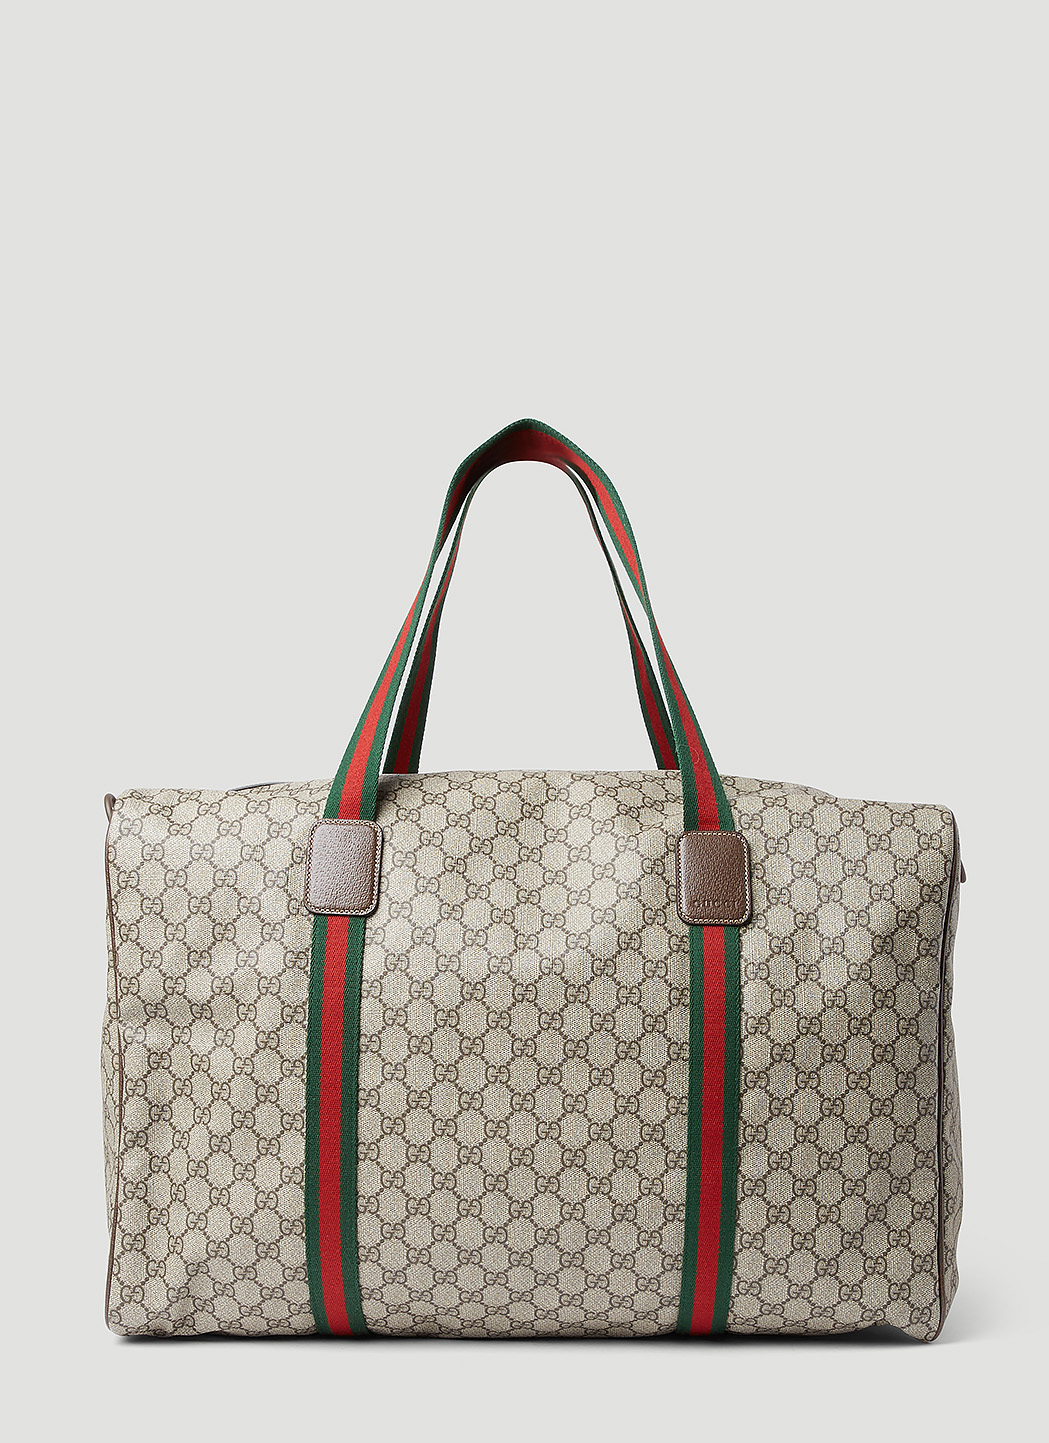 Gucci - With emblematic codes, the Gucci Savoy duffle explores the House's  origins in luggage. Discover more on.gucci.com/__GucciValigeria_ | Facebook